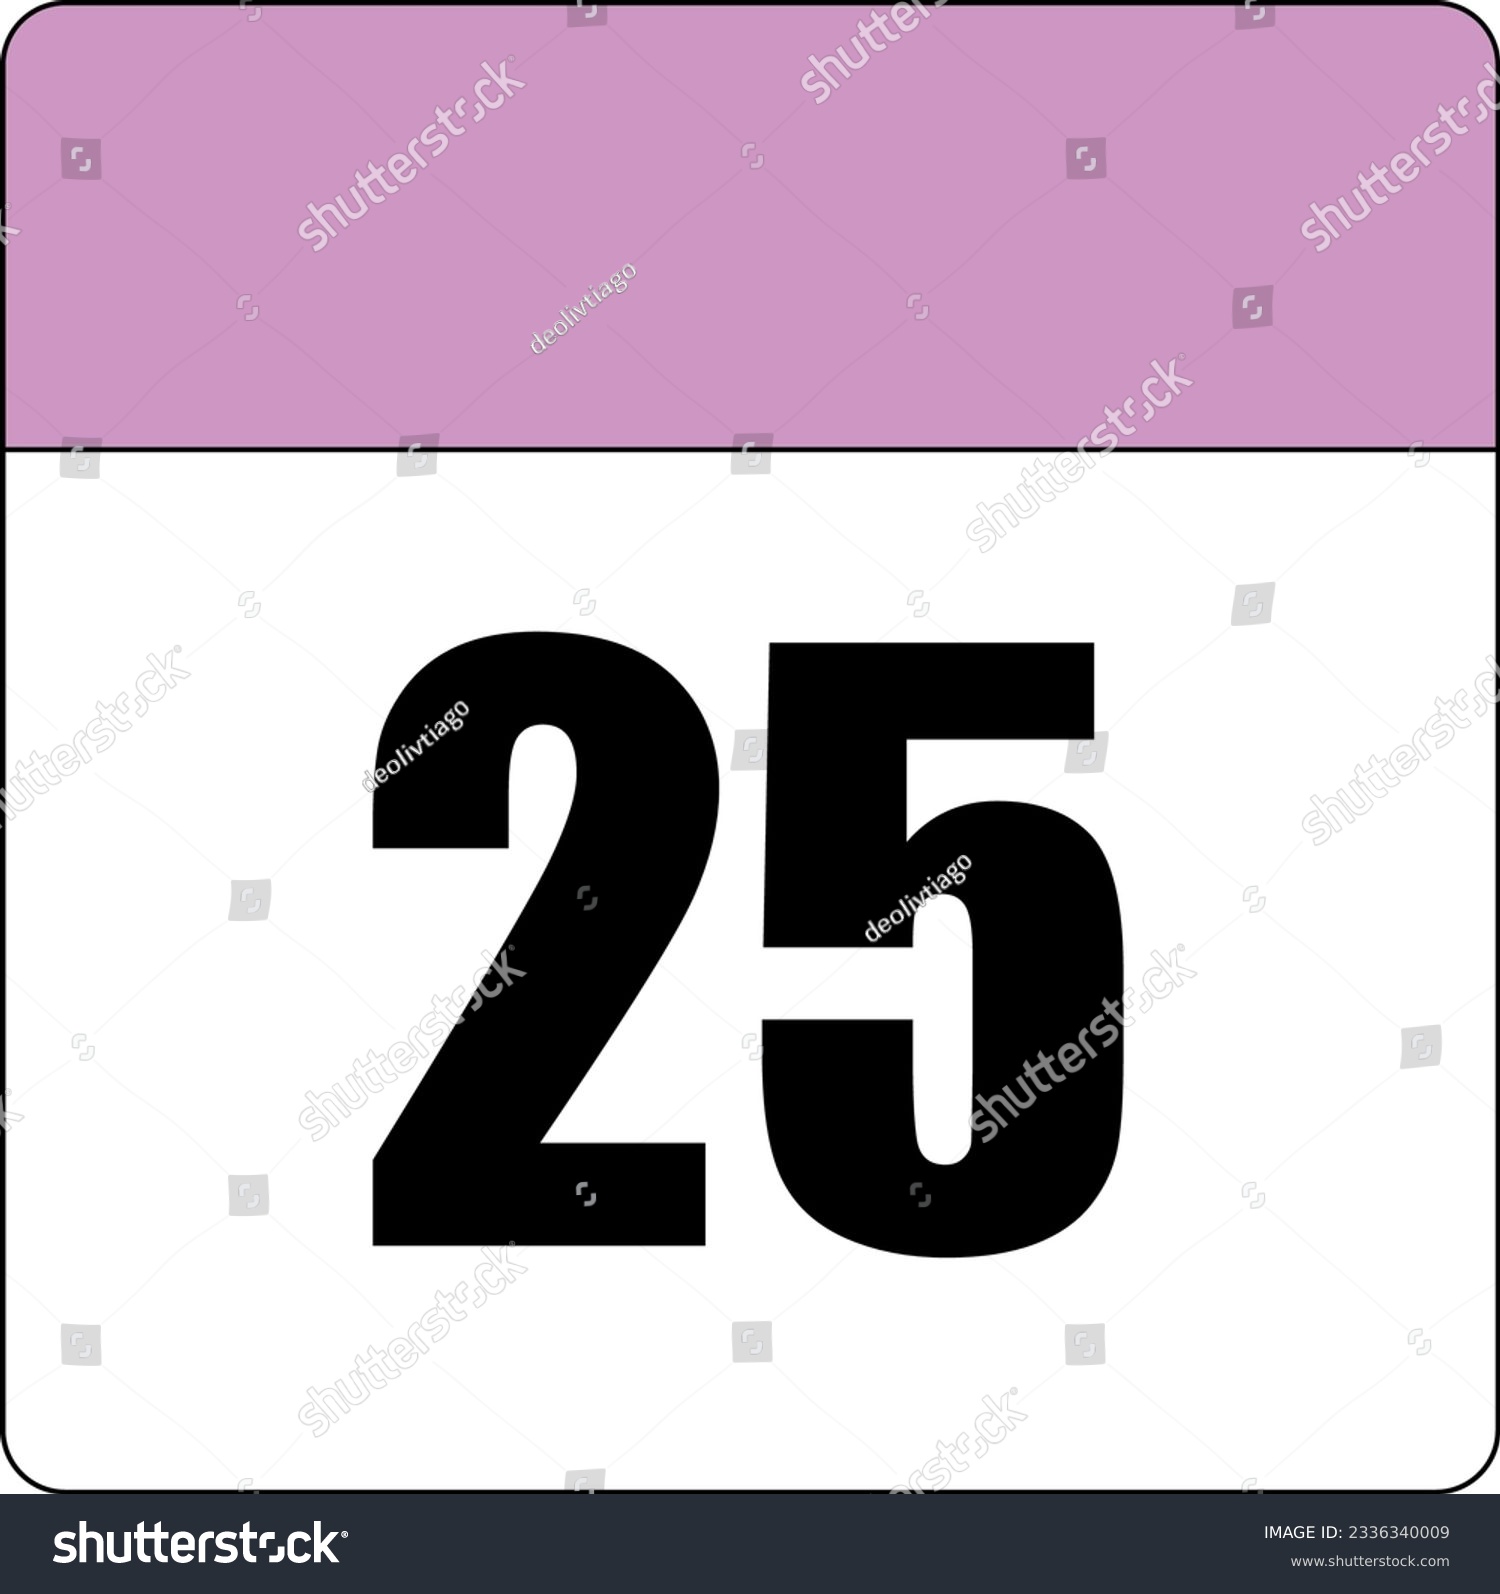 SVG of simple calendar icon with pink header and white background showing 25th day number twenty-five svg